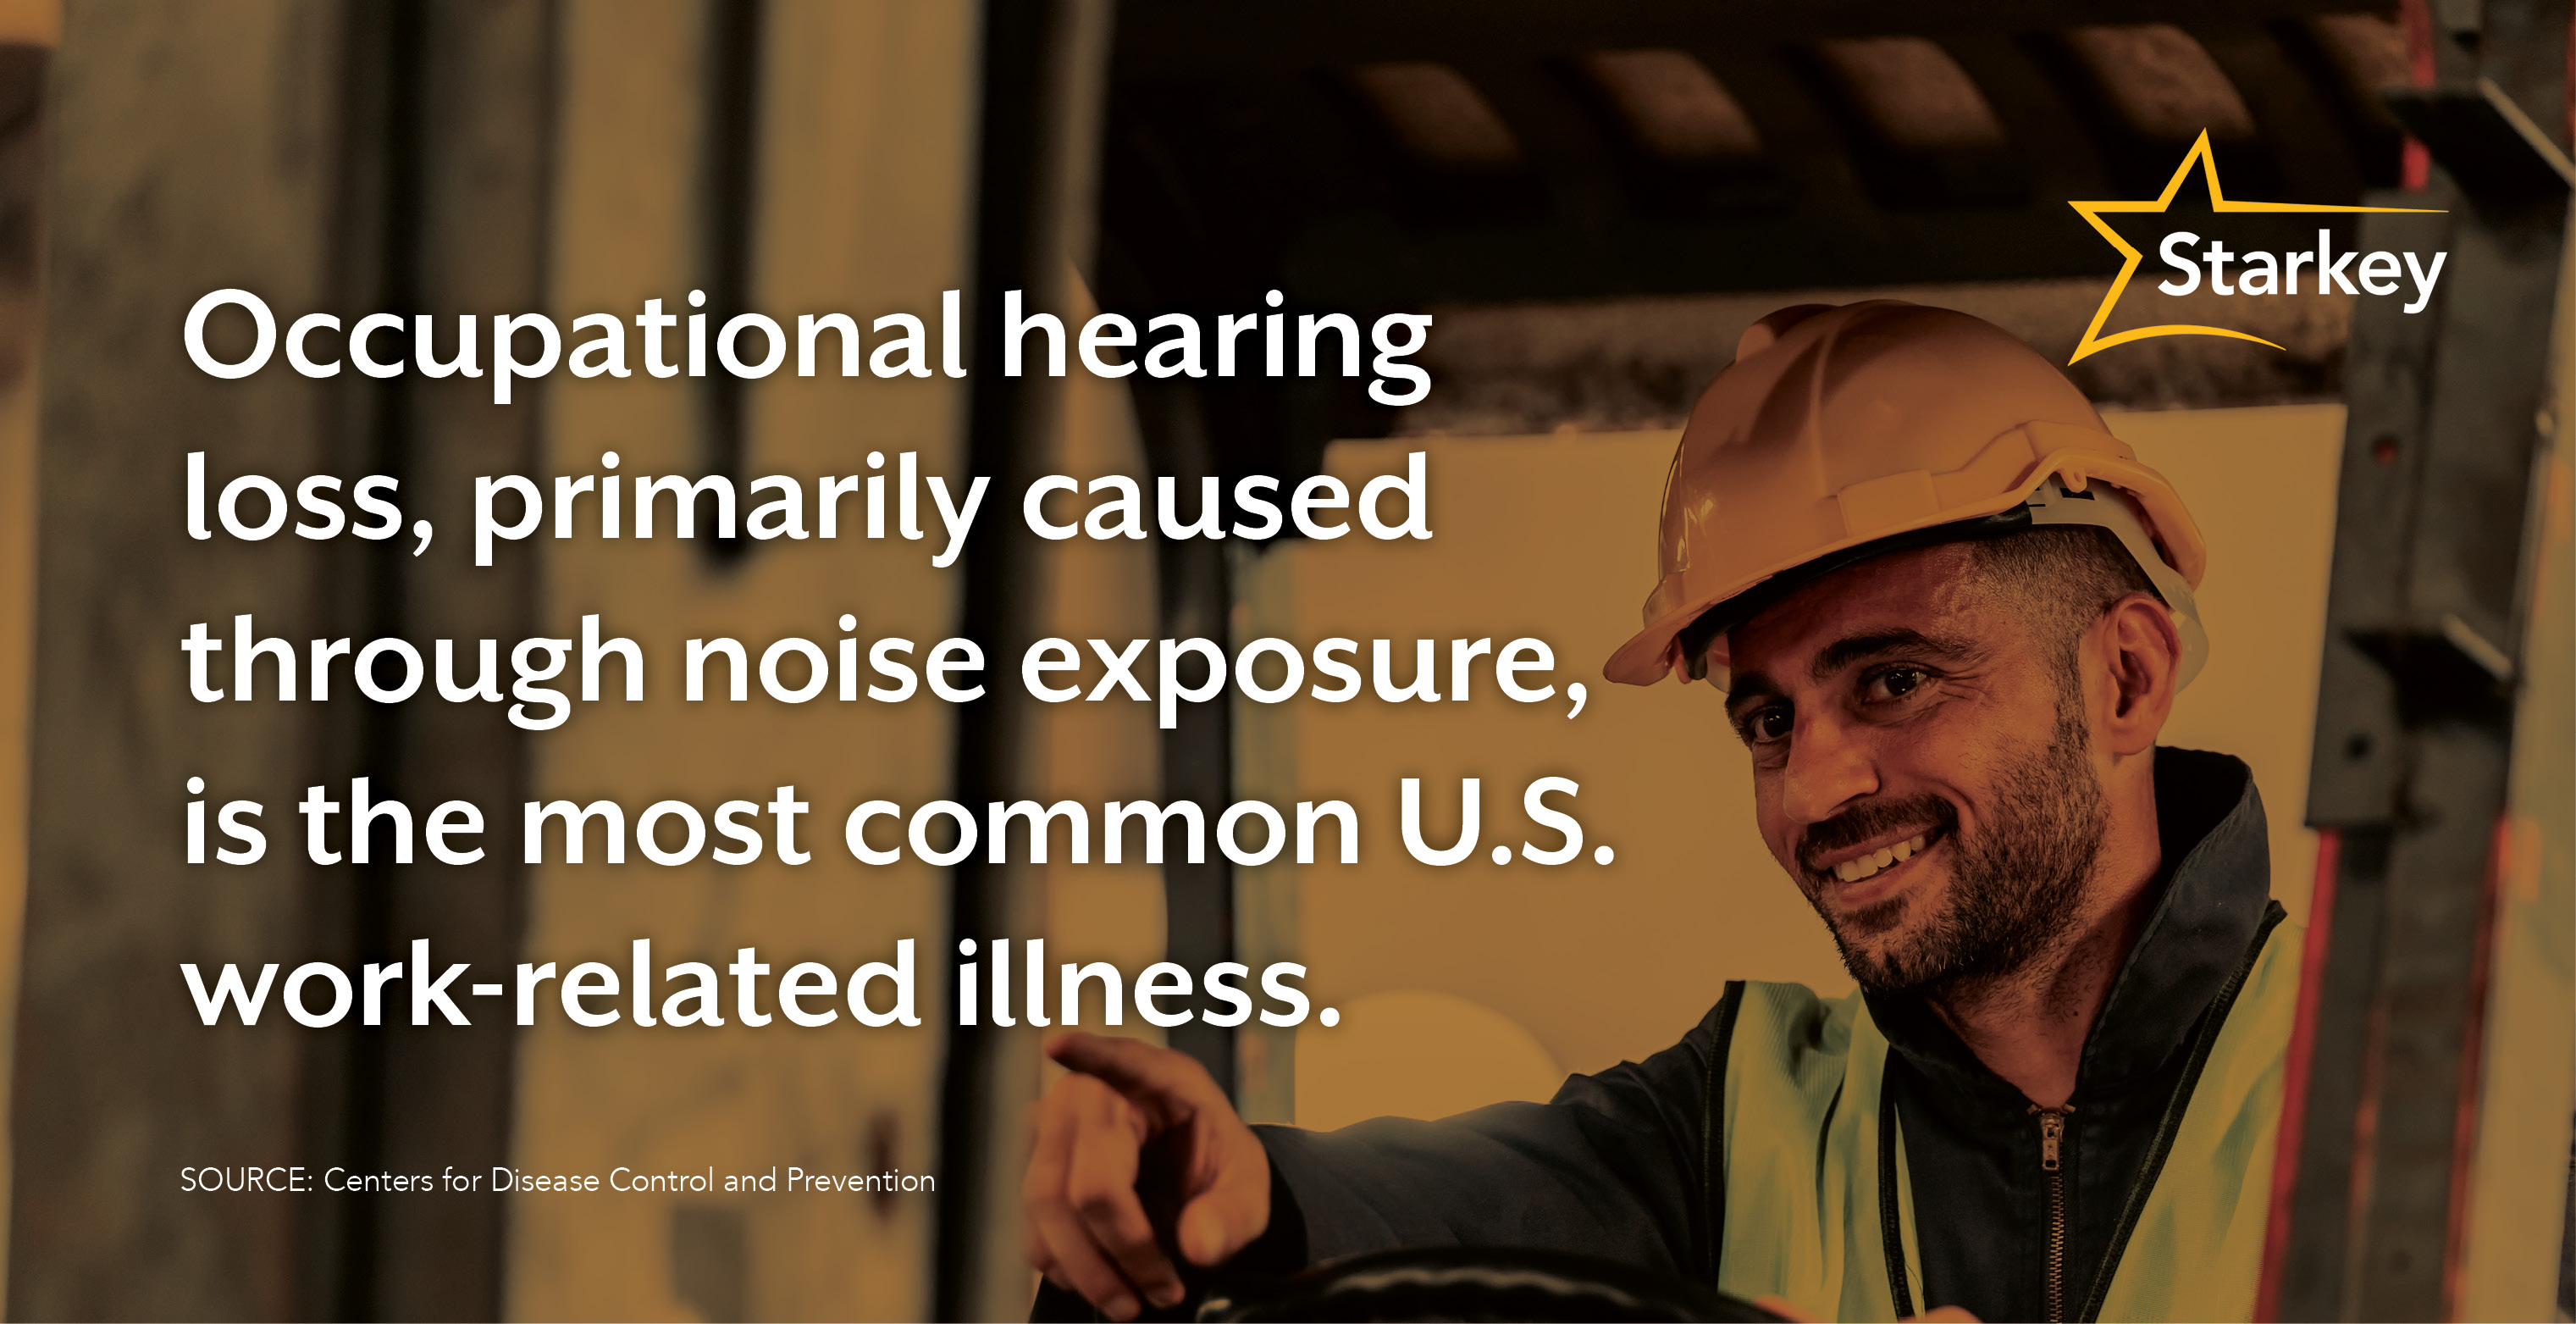 Image of warehouse or construction worker in a forklift beside the words, "Occupational hearing loss, primarily caused through noise exposure, is the most common U.S. work-related illness"